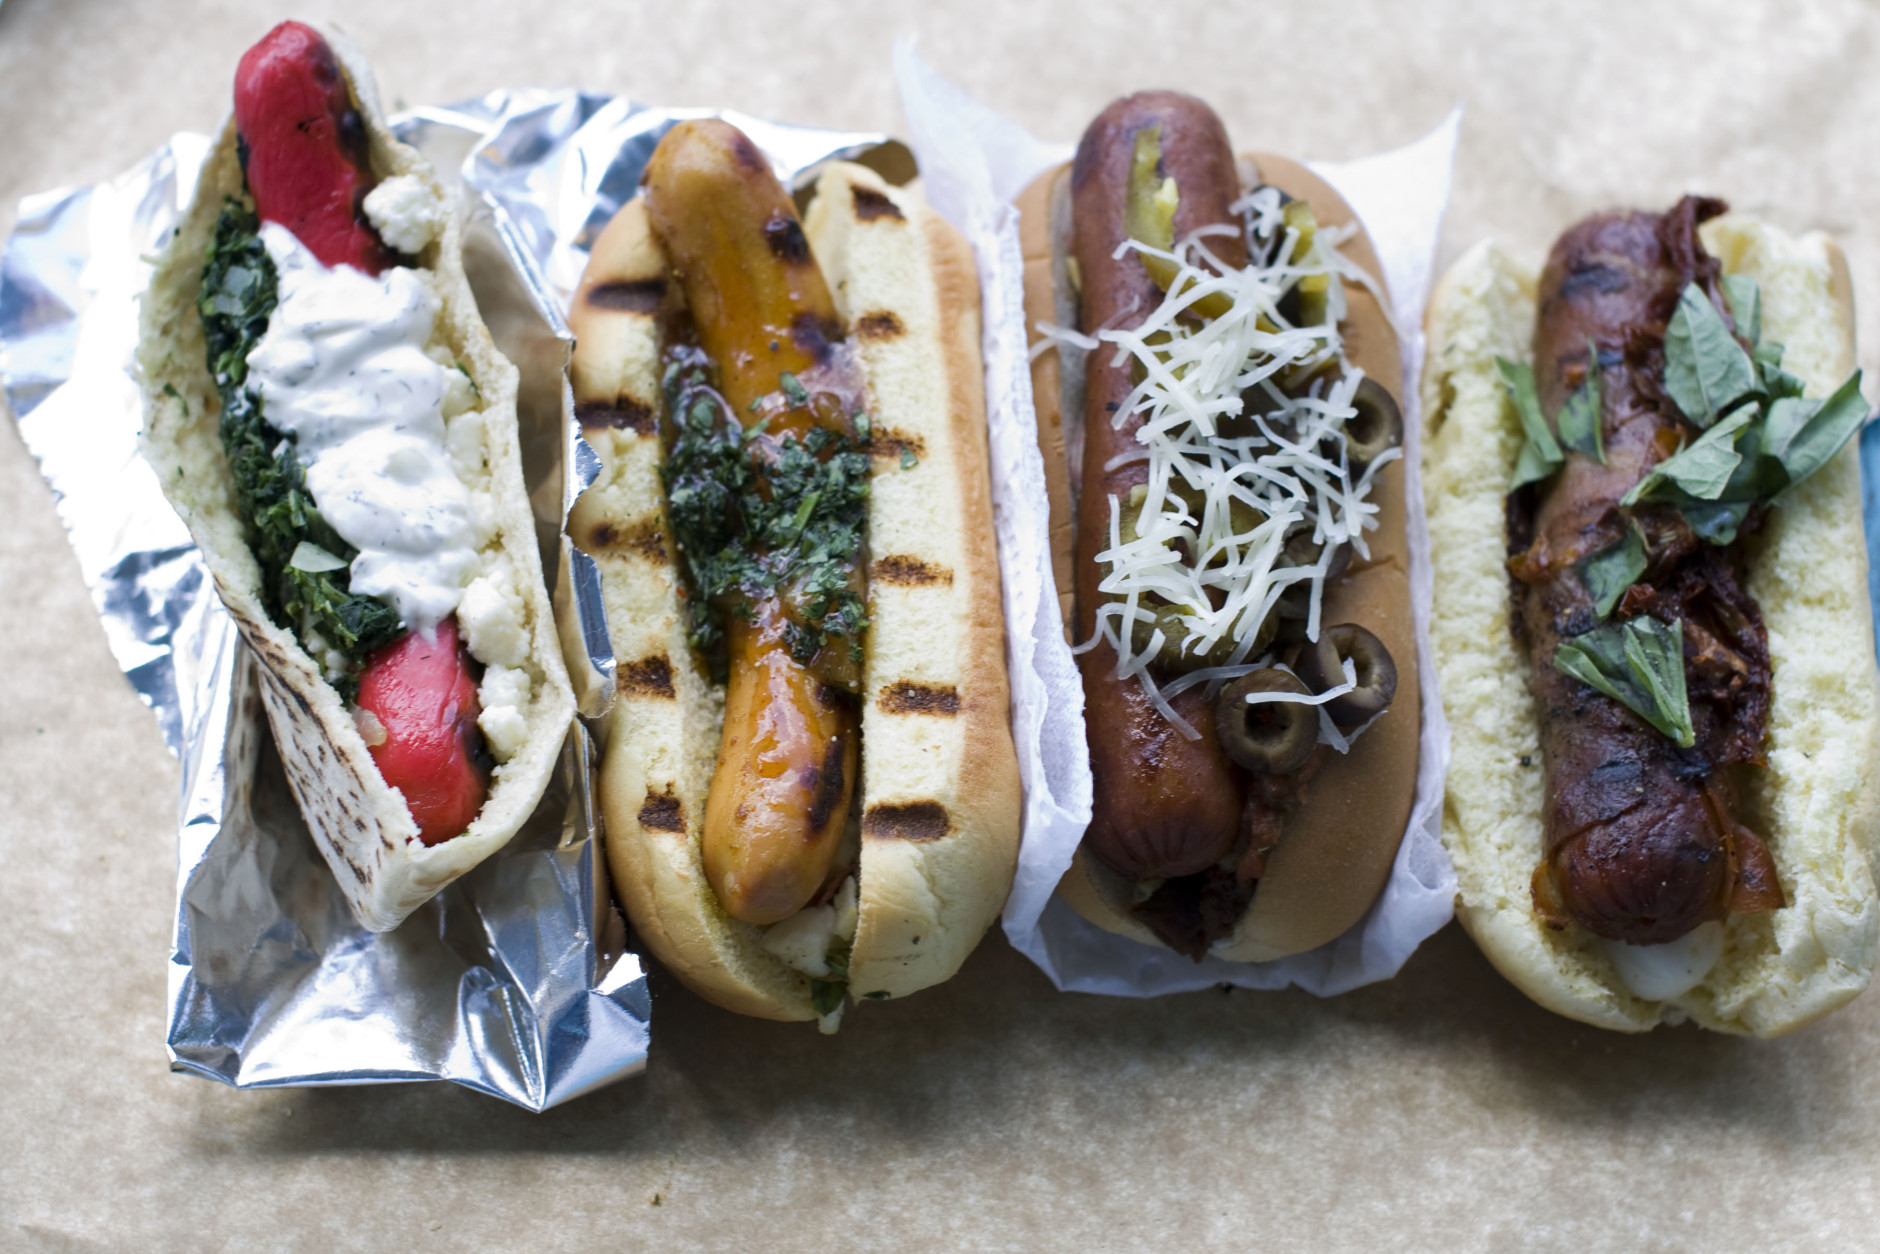 In this image taken on July 30, 2012, hot dogs, from left, Greek spanakopita, Indian curry, taco and pizza are shown in Concord, N.H. (AP Photo/Matthew Mead)